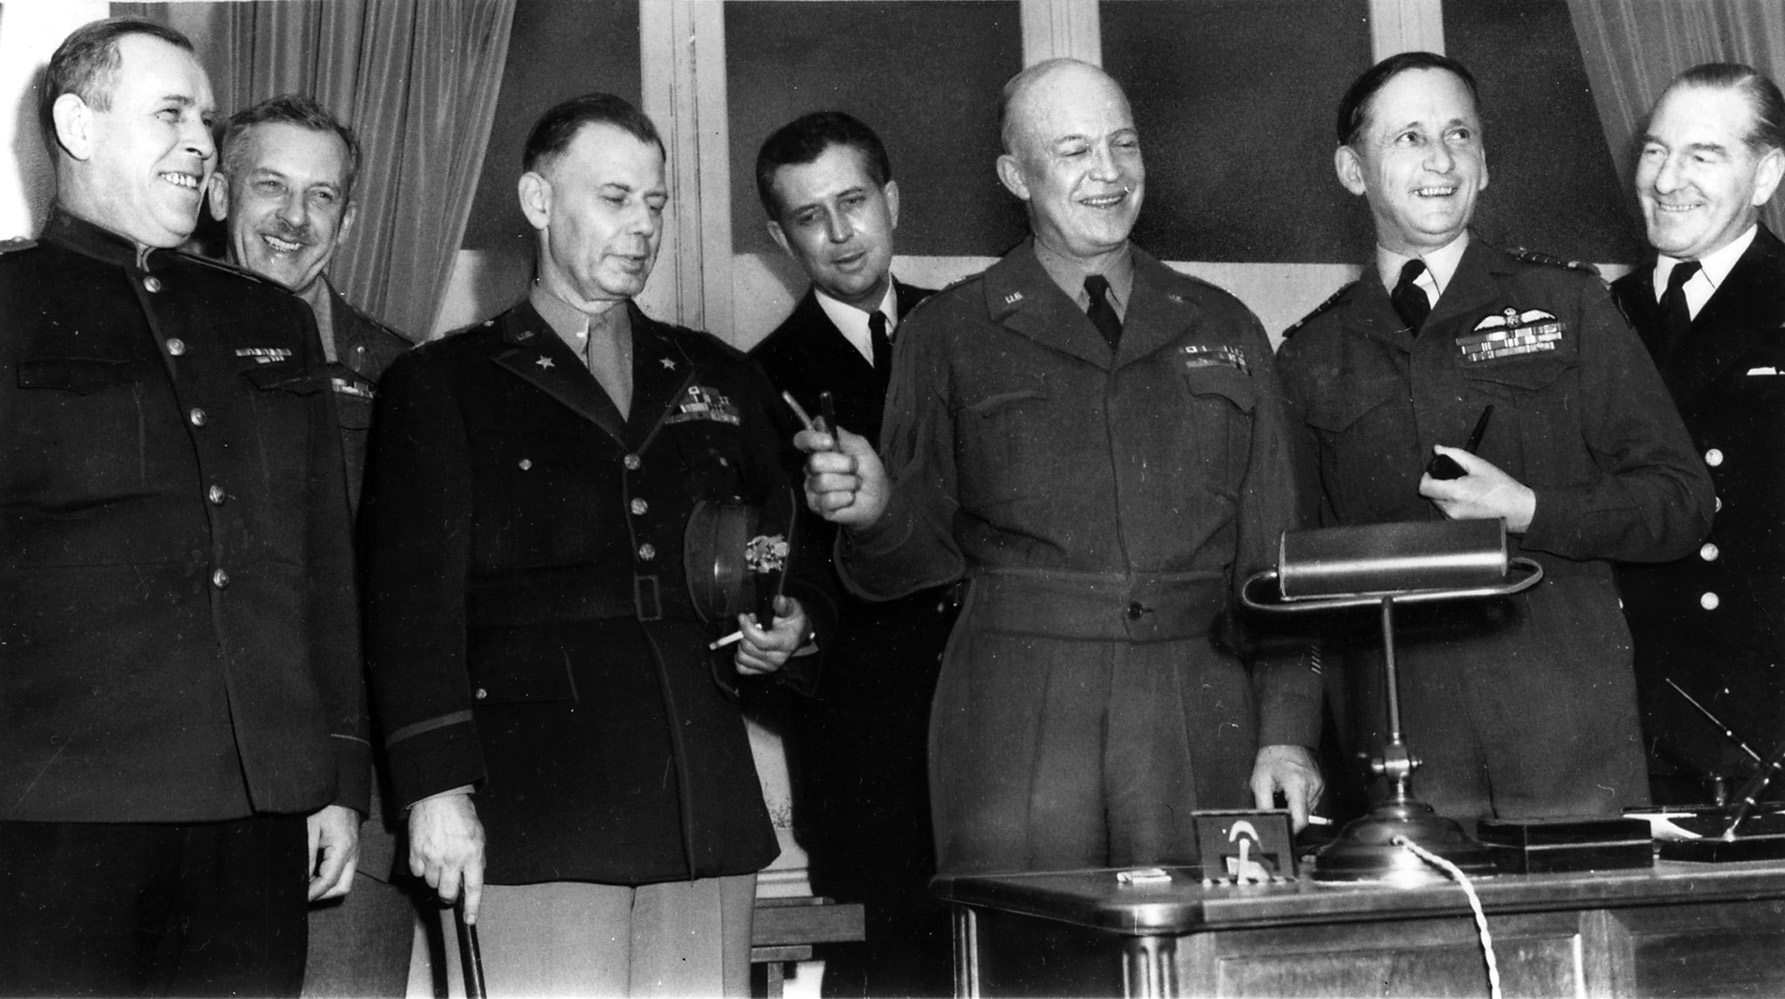 Senior Allied officers gather after the German surrender at Reims. General Dwight Eisenhower holds the pens used to sign the surrender documents. At Eisenhower’s right is his chief of staff, General Walter Bedell Smith, and to his left is Air Chief Marshal Arthur Tedder.